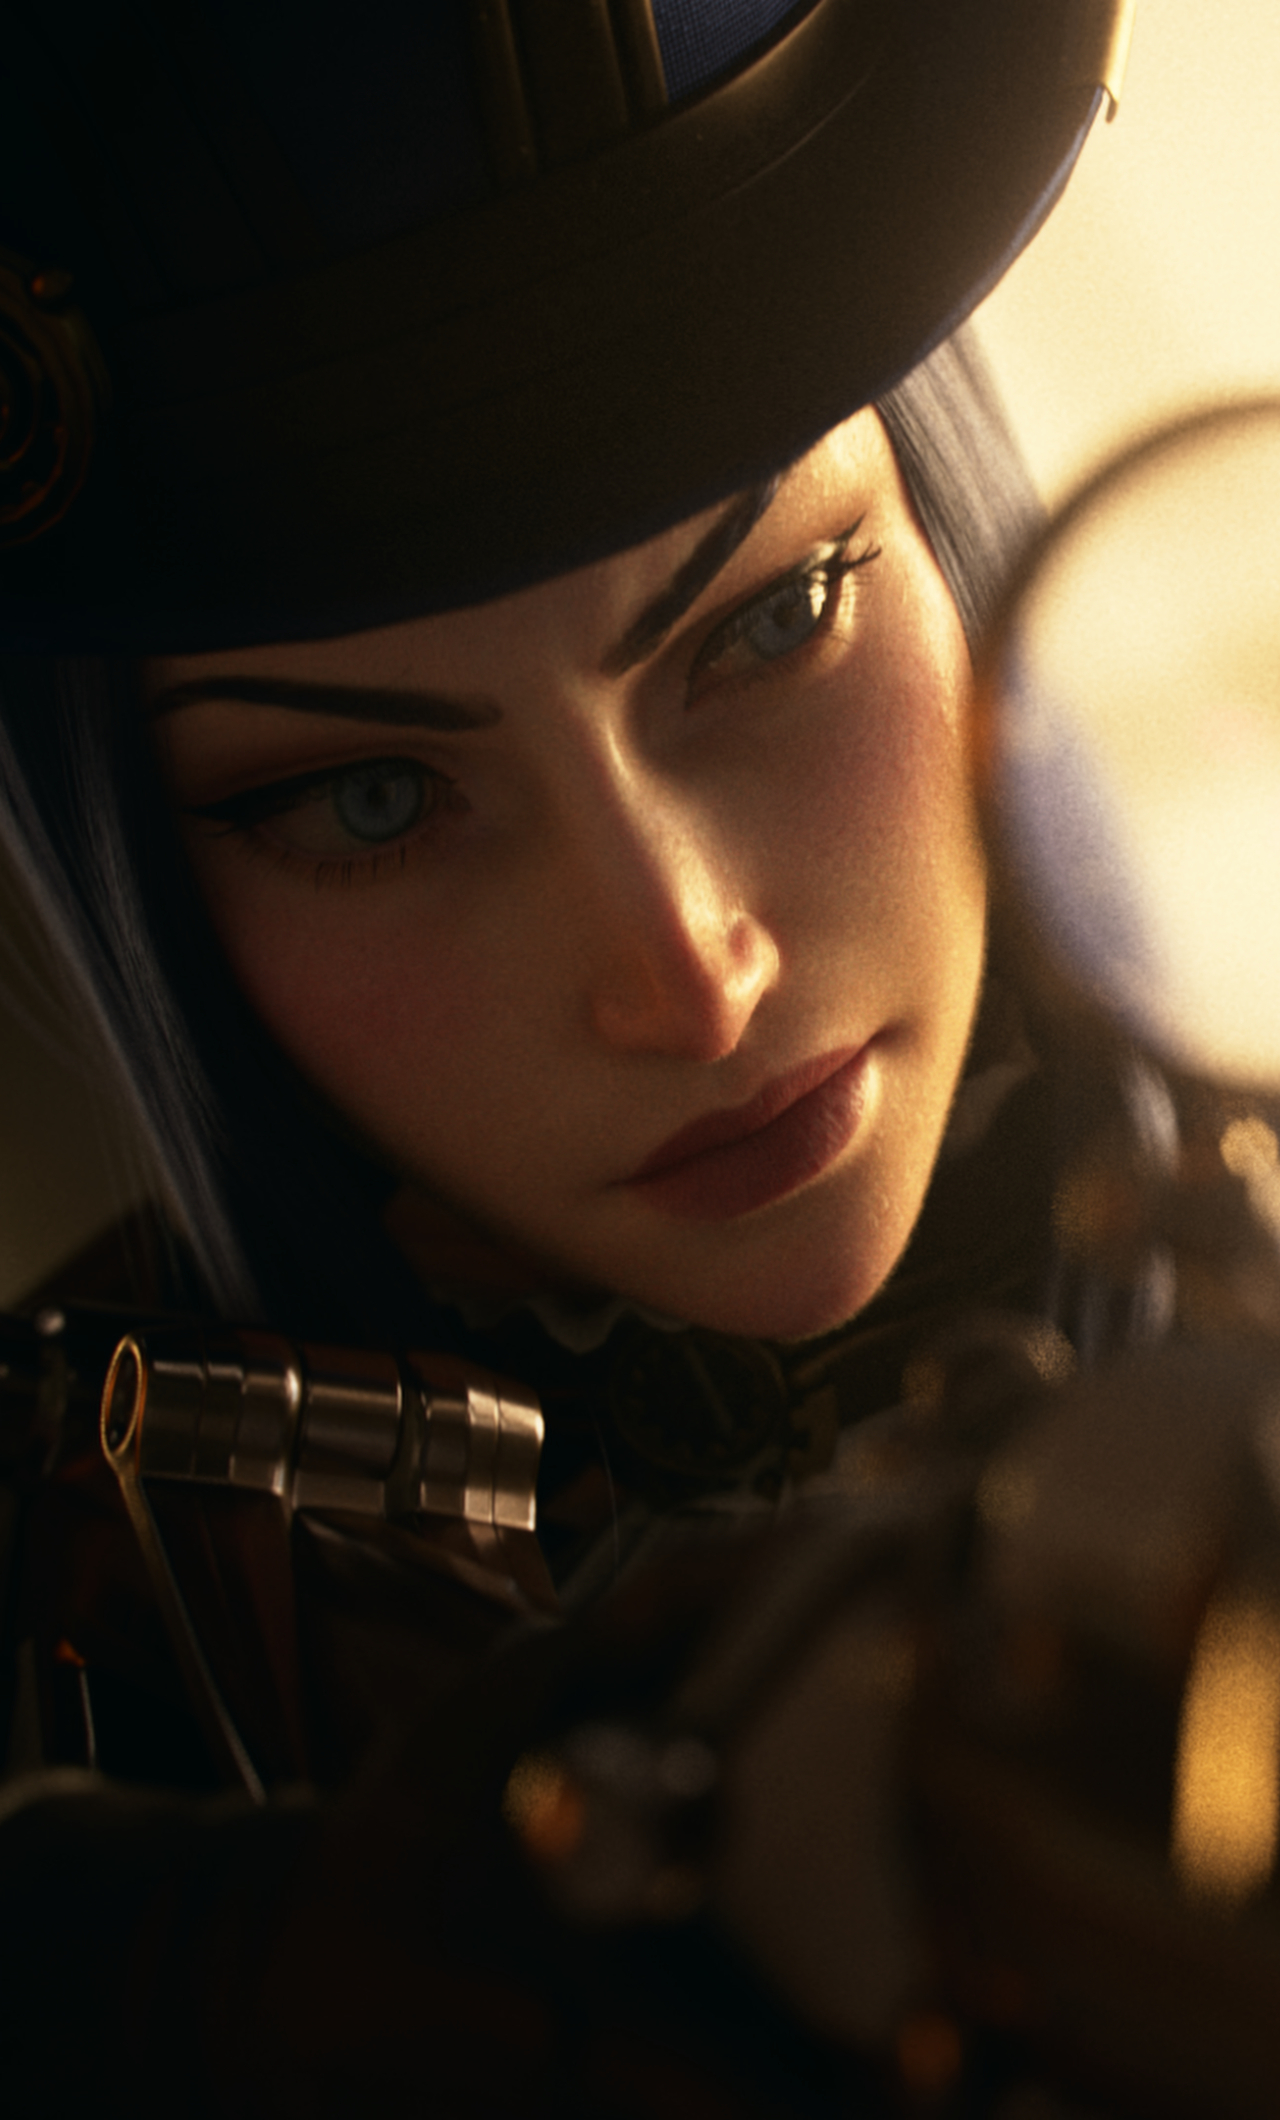 1280x21 Caitlyn Lol 4k Iphone 6 Plus Wallpaper Hd Games 4k Wallpapers Images Photos And Background